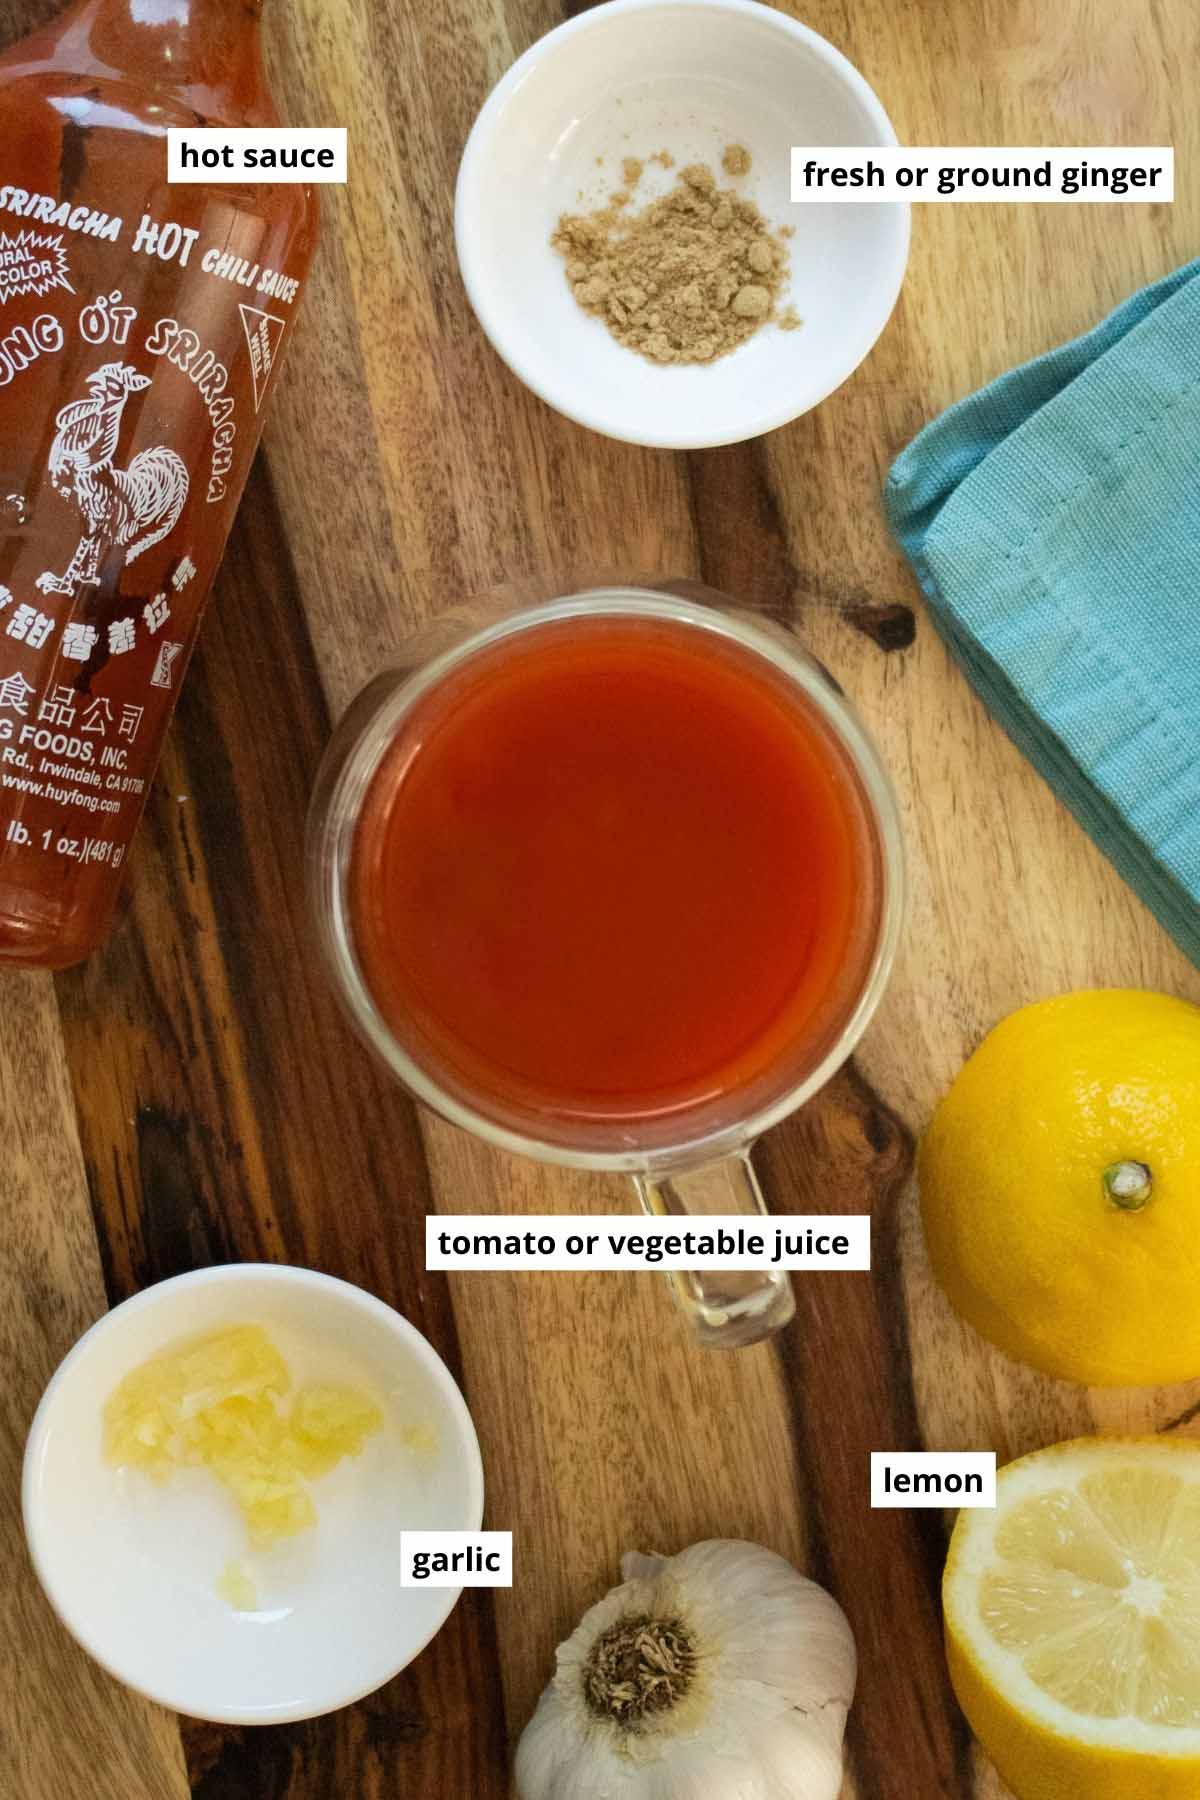 hot sauce, ginger, lemon, garlic, and tomato juice in cups and bottles on a wooden countertop